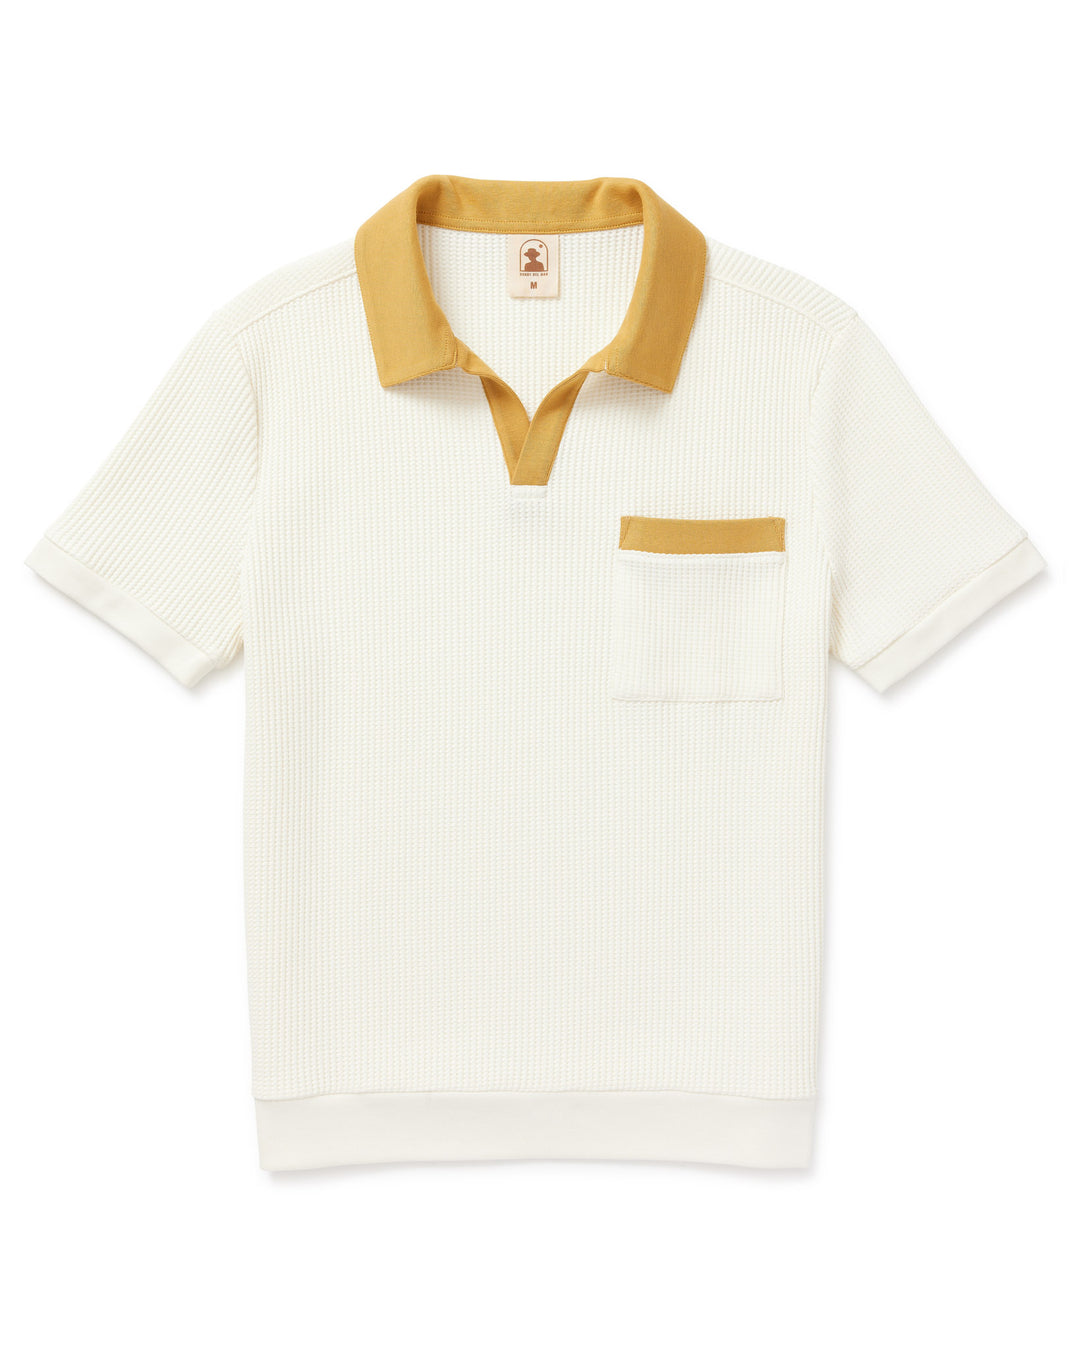 A white polo shirt with a white pocket and golden trim.